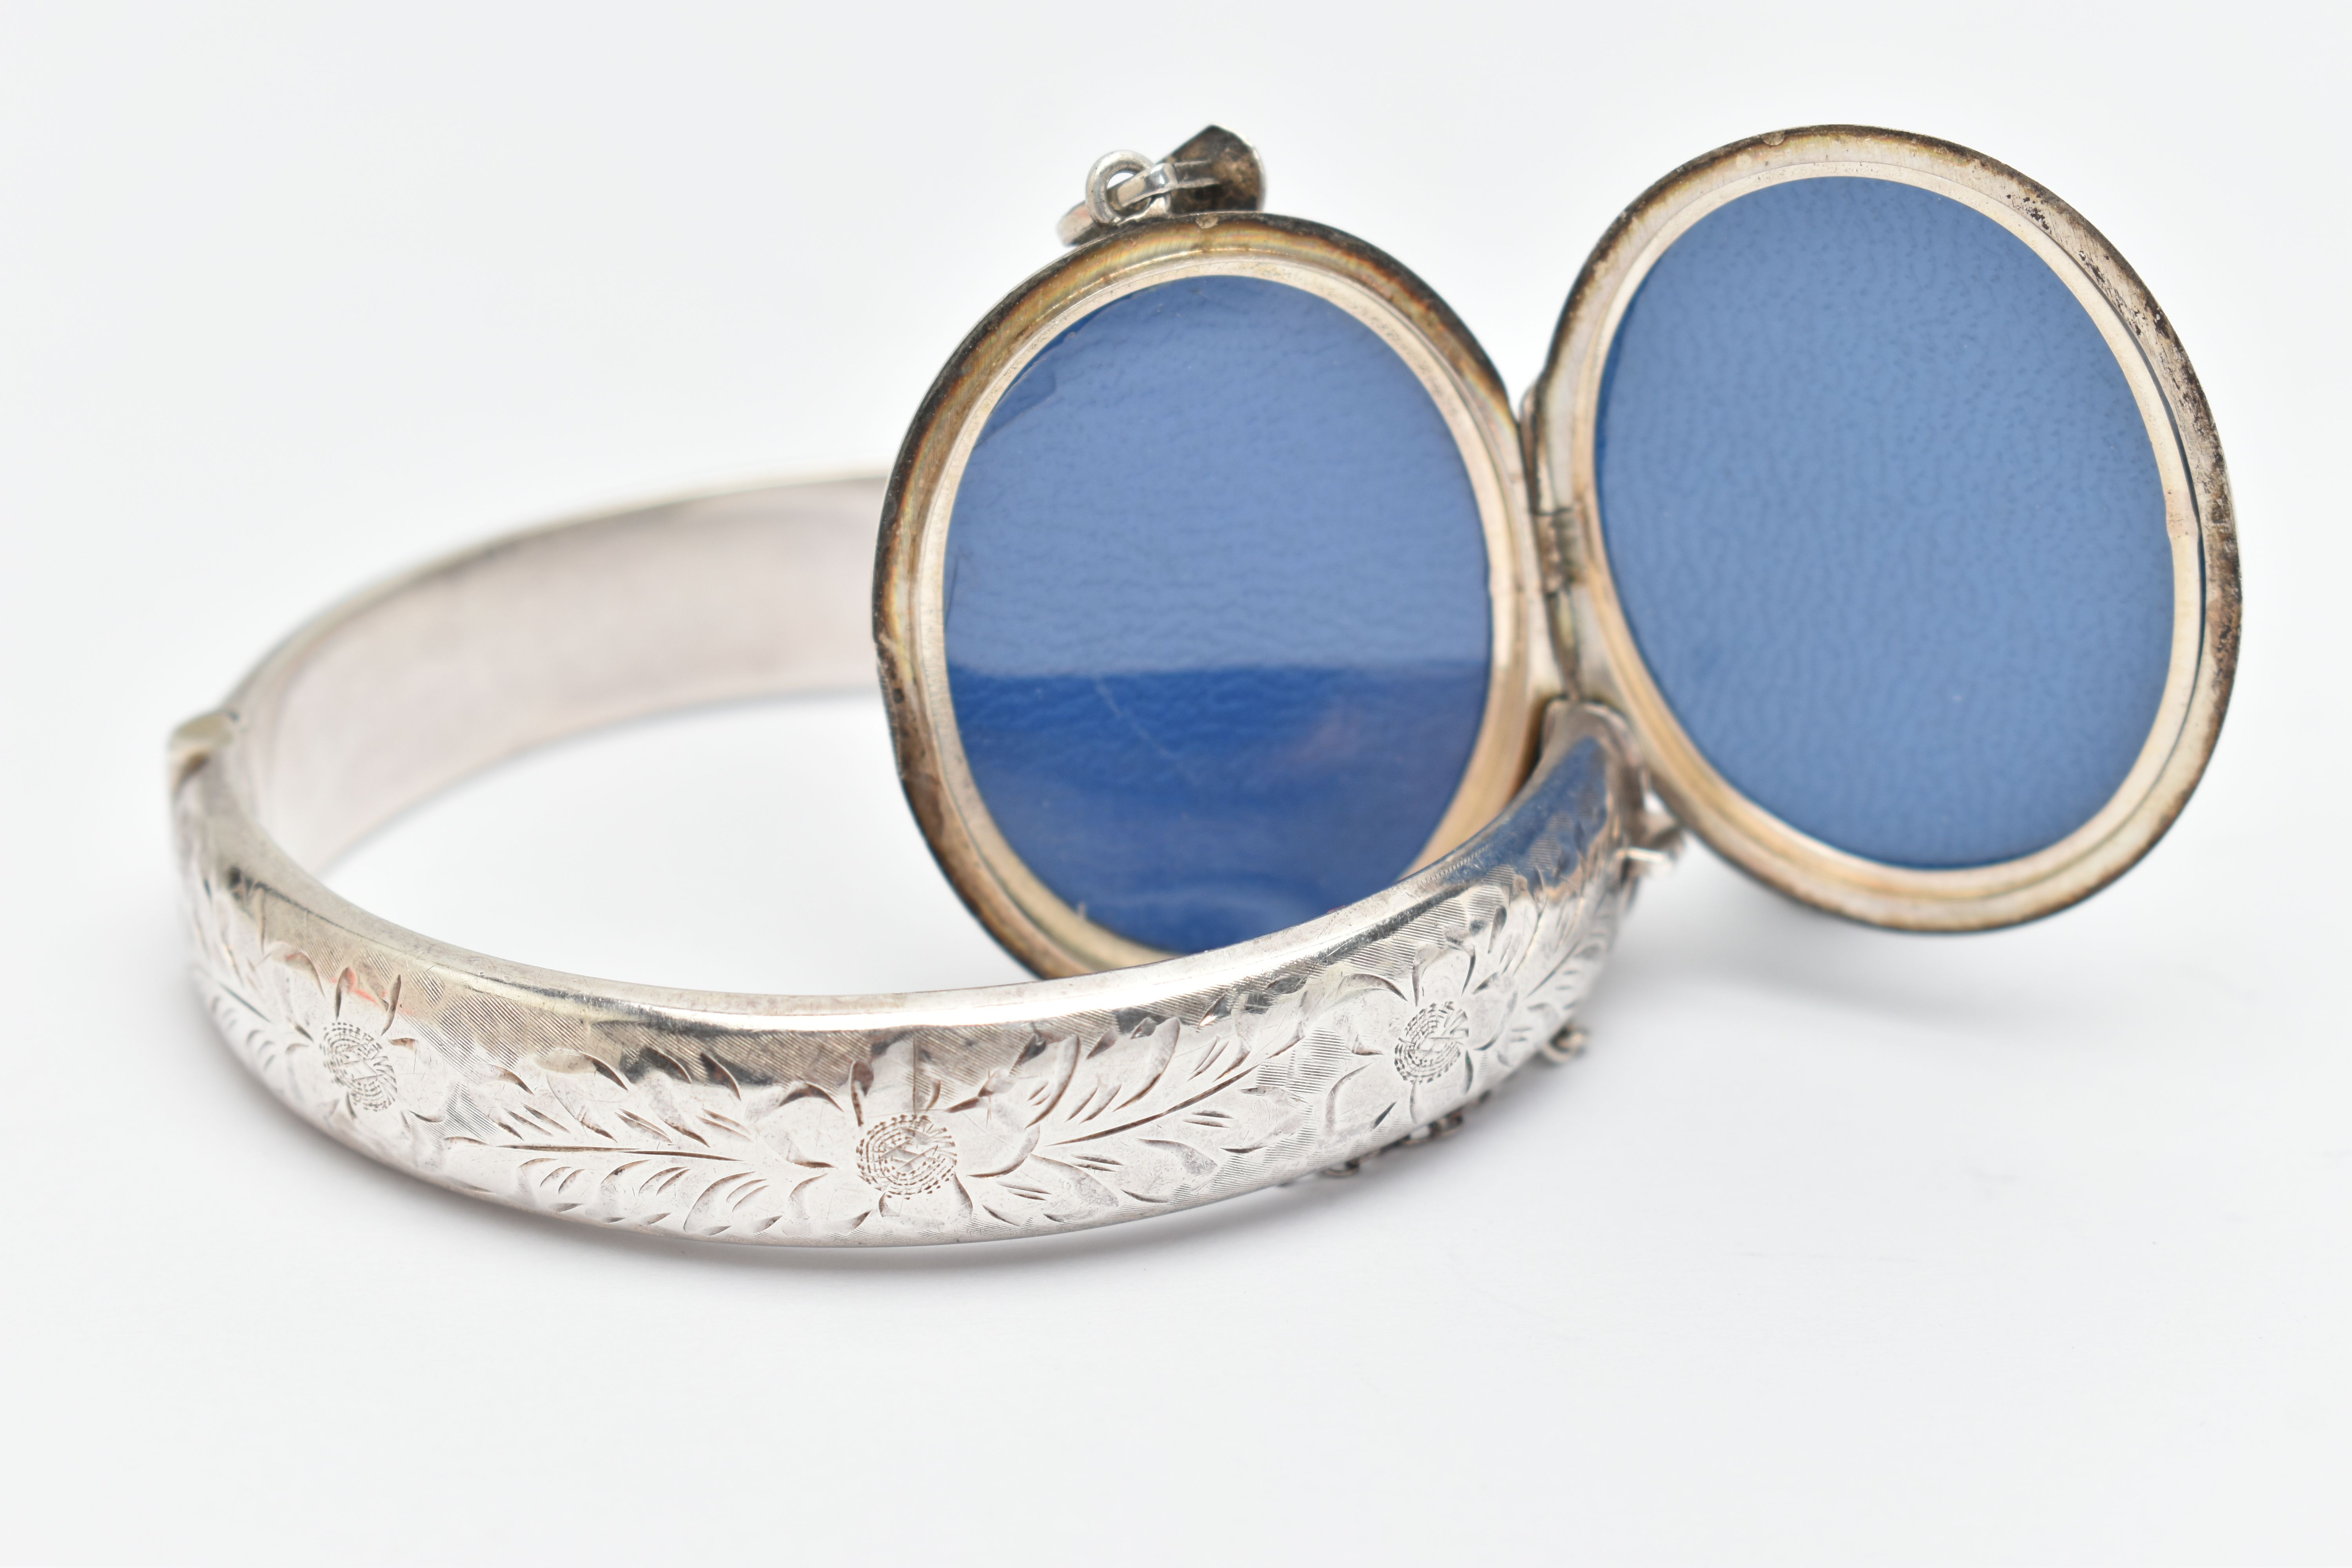 A SILVER HINGED BANGLE AND LOCKET, the bangle with floral pattern, fitted with a push piece - Image 3 of 3